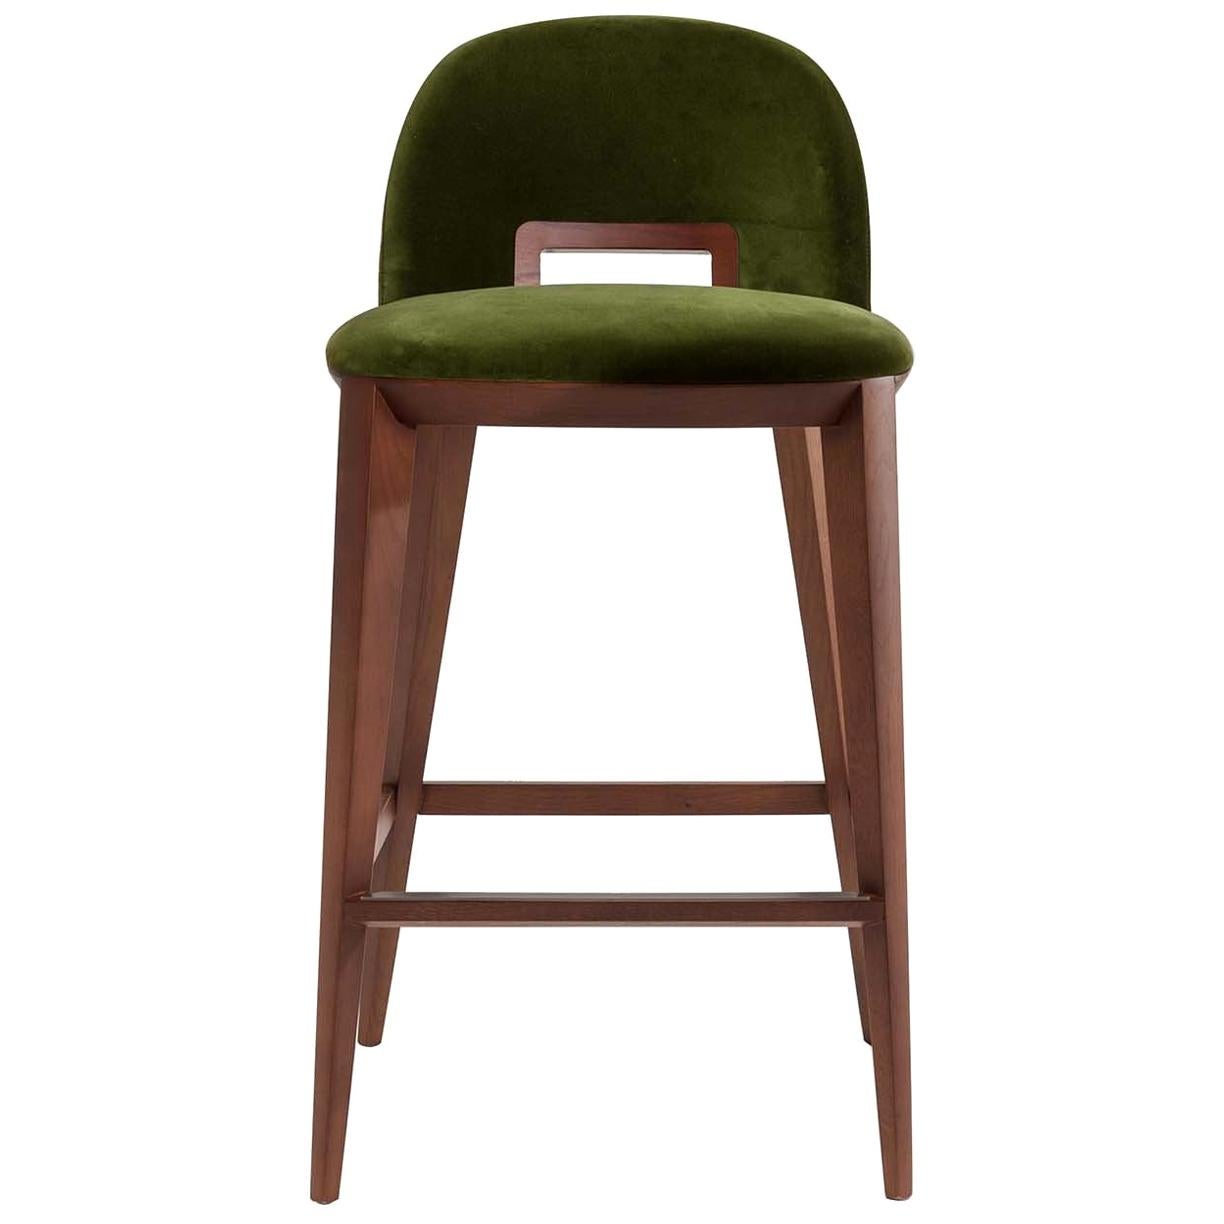 Margaret Green Stool by Cesare Arosio